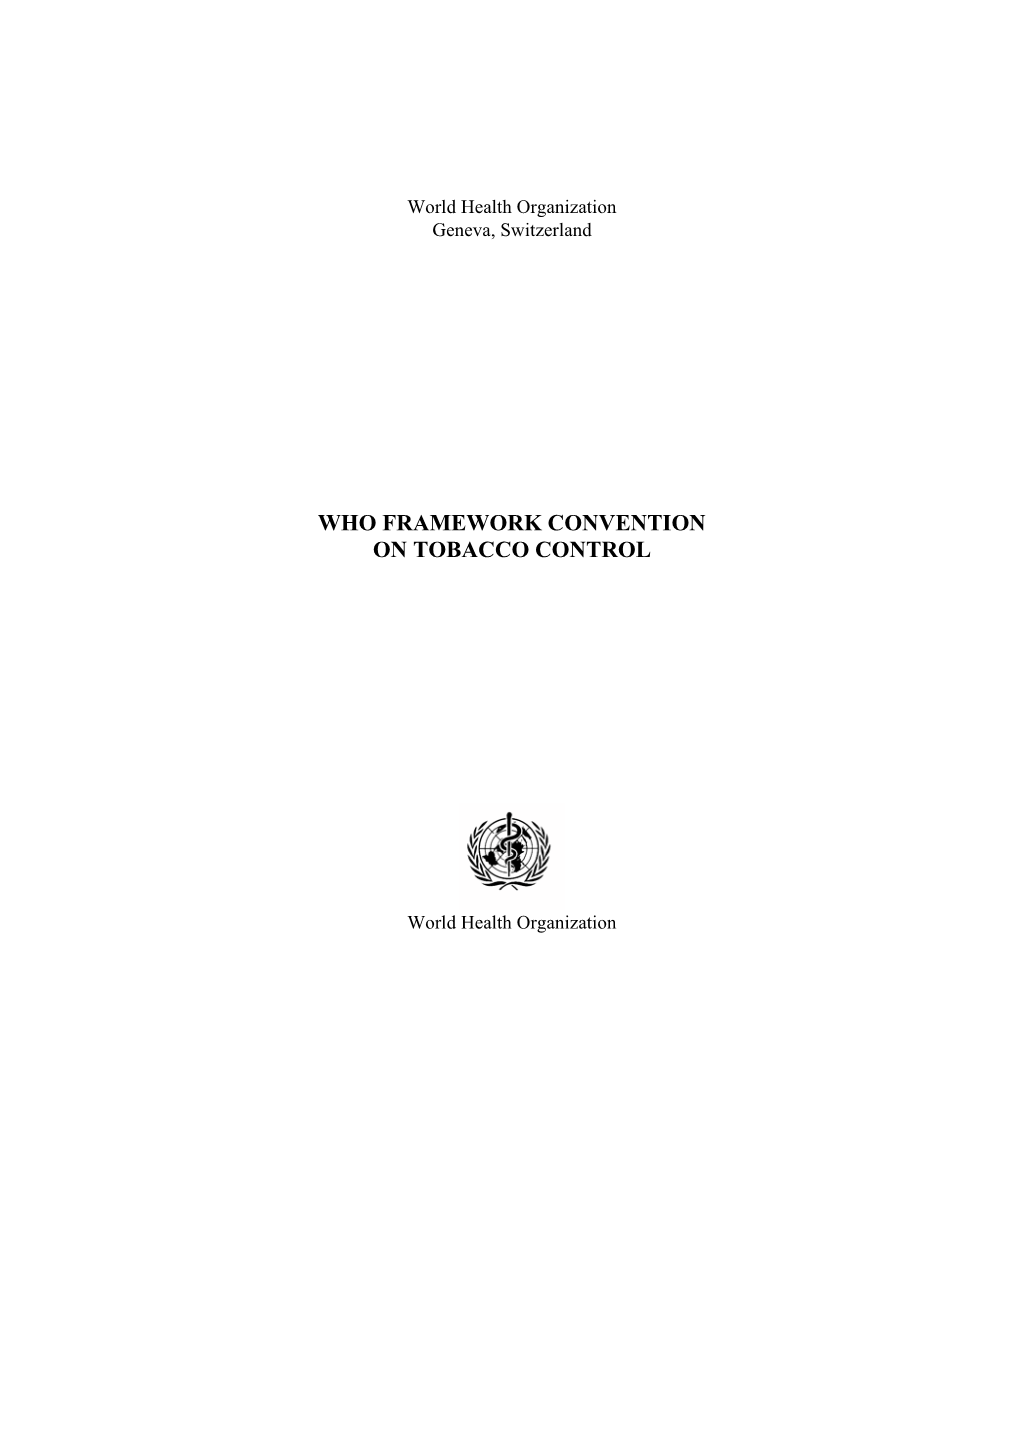 Framework Convention on Tobacco Control (WHO FCTC) Is the First Treaty Negotiated Under the Auspices of the World Health Organization